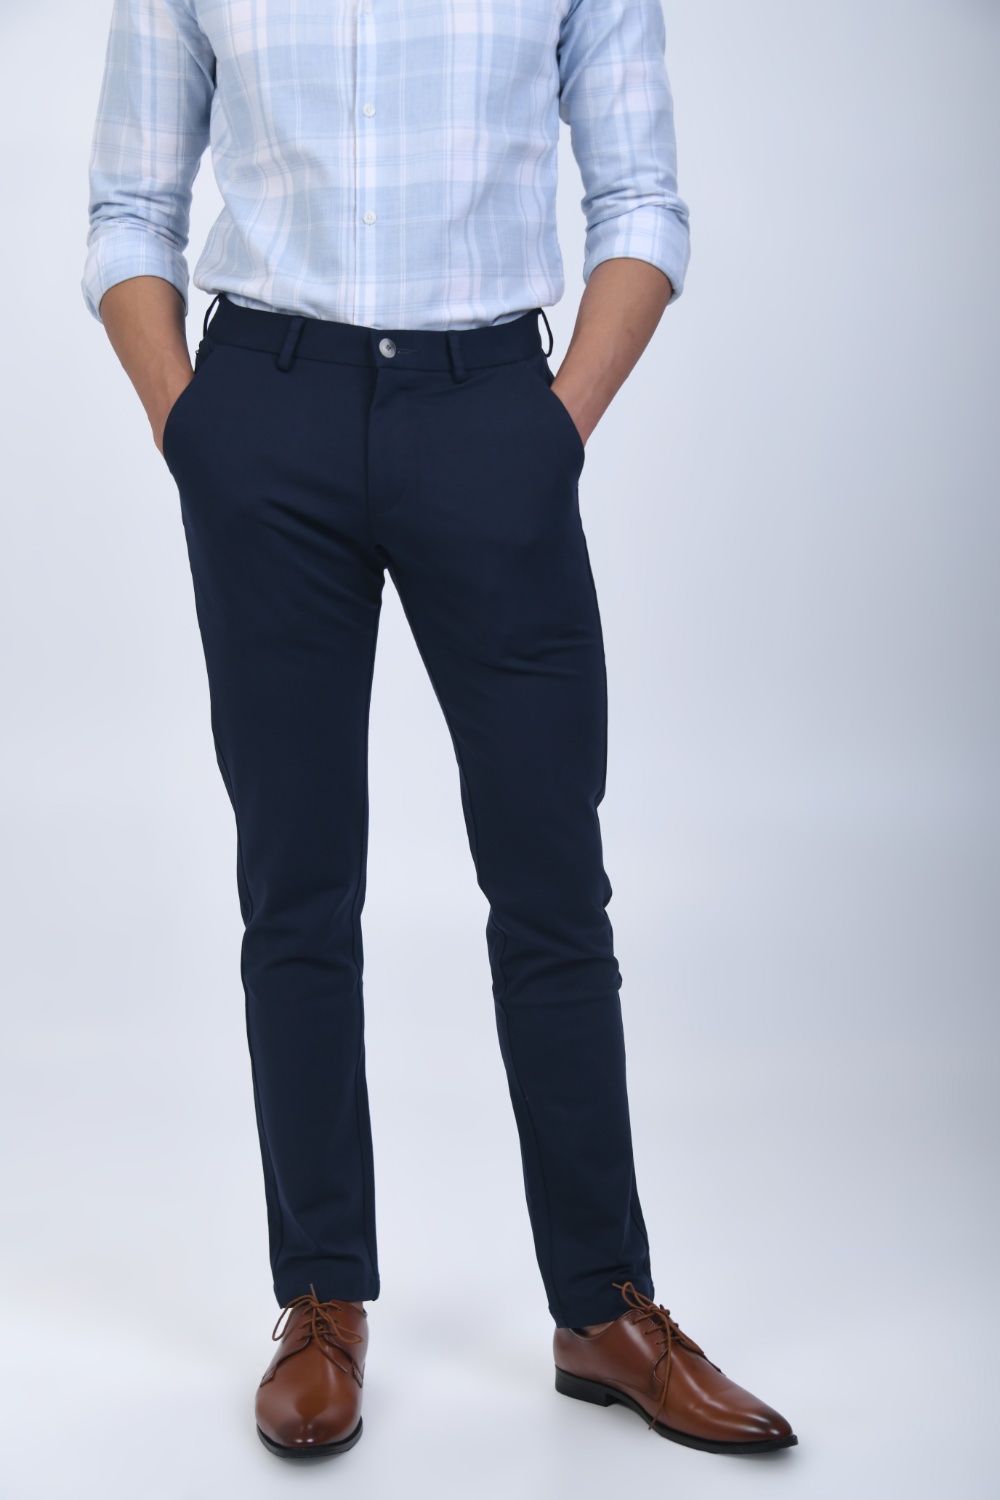 Buy Mast & Harbour Men Navy Blue Solid Trousers - Trousers for Men 18216120  | Myntra